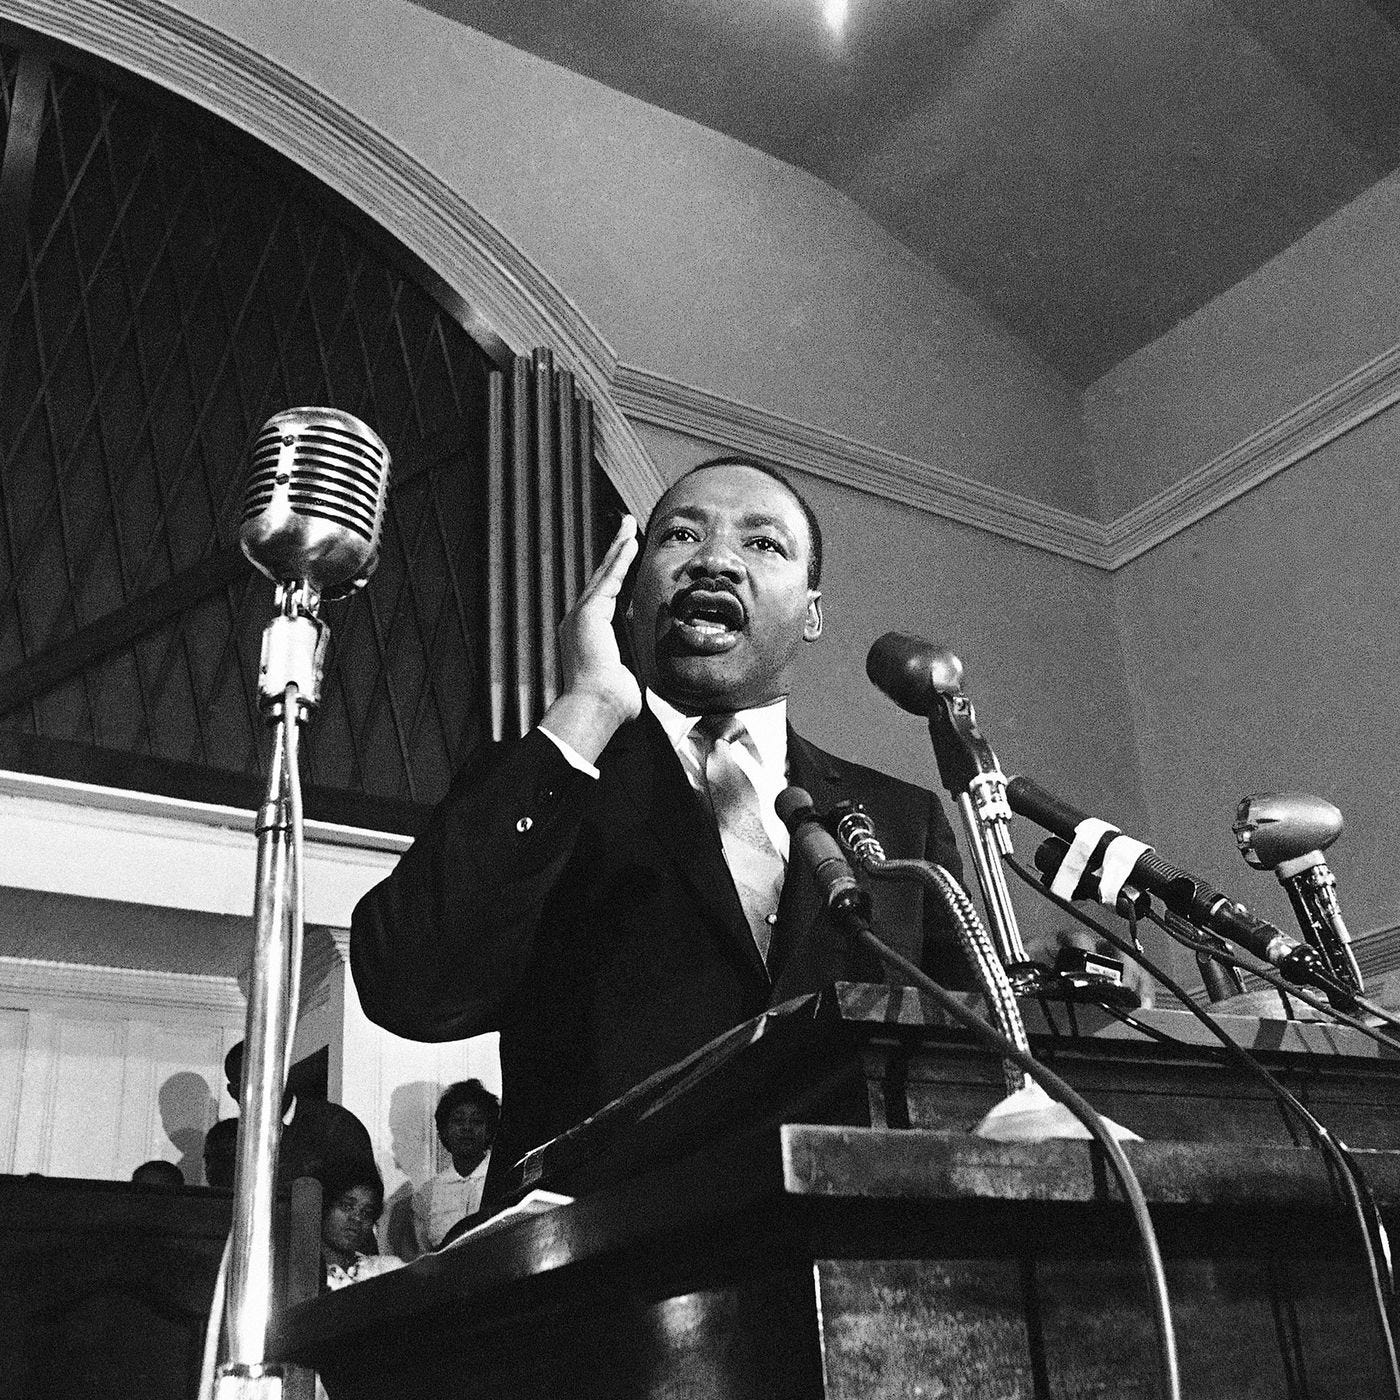 America celebrates Martin Luther King Jr. but erases his true legacy - Vox